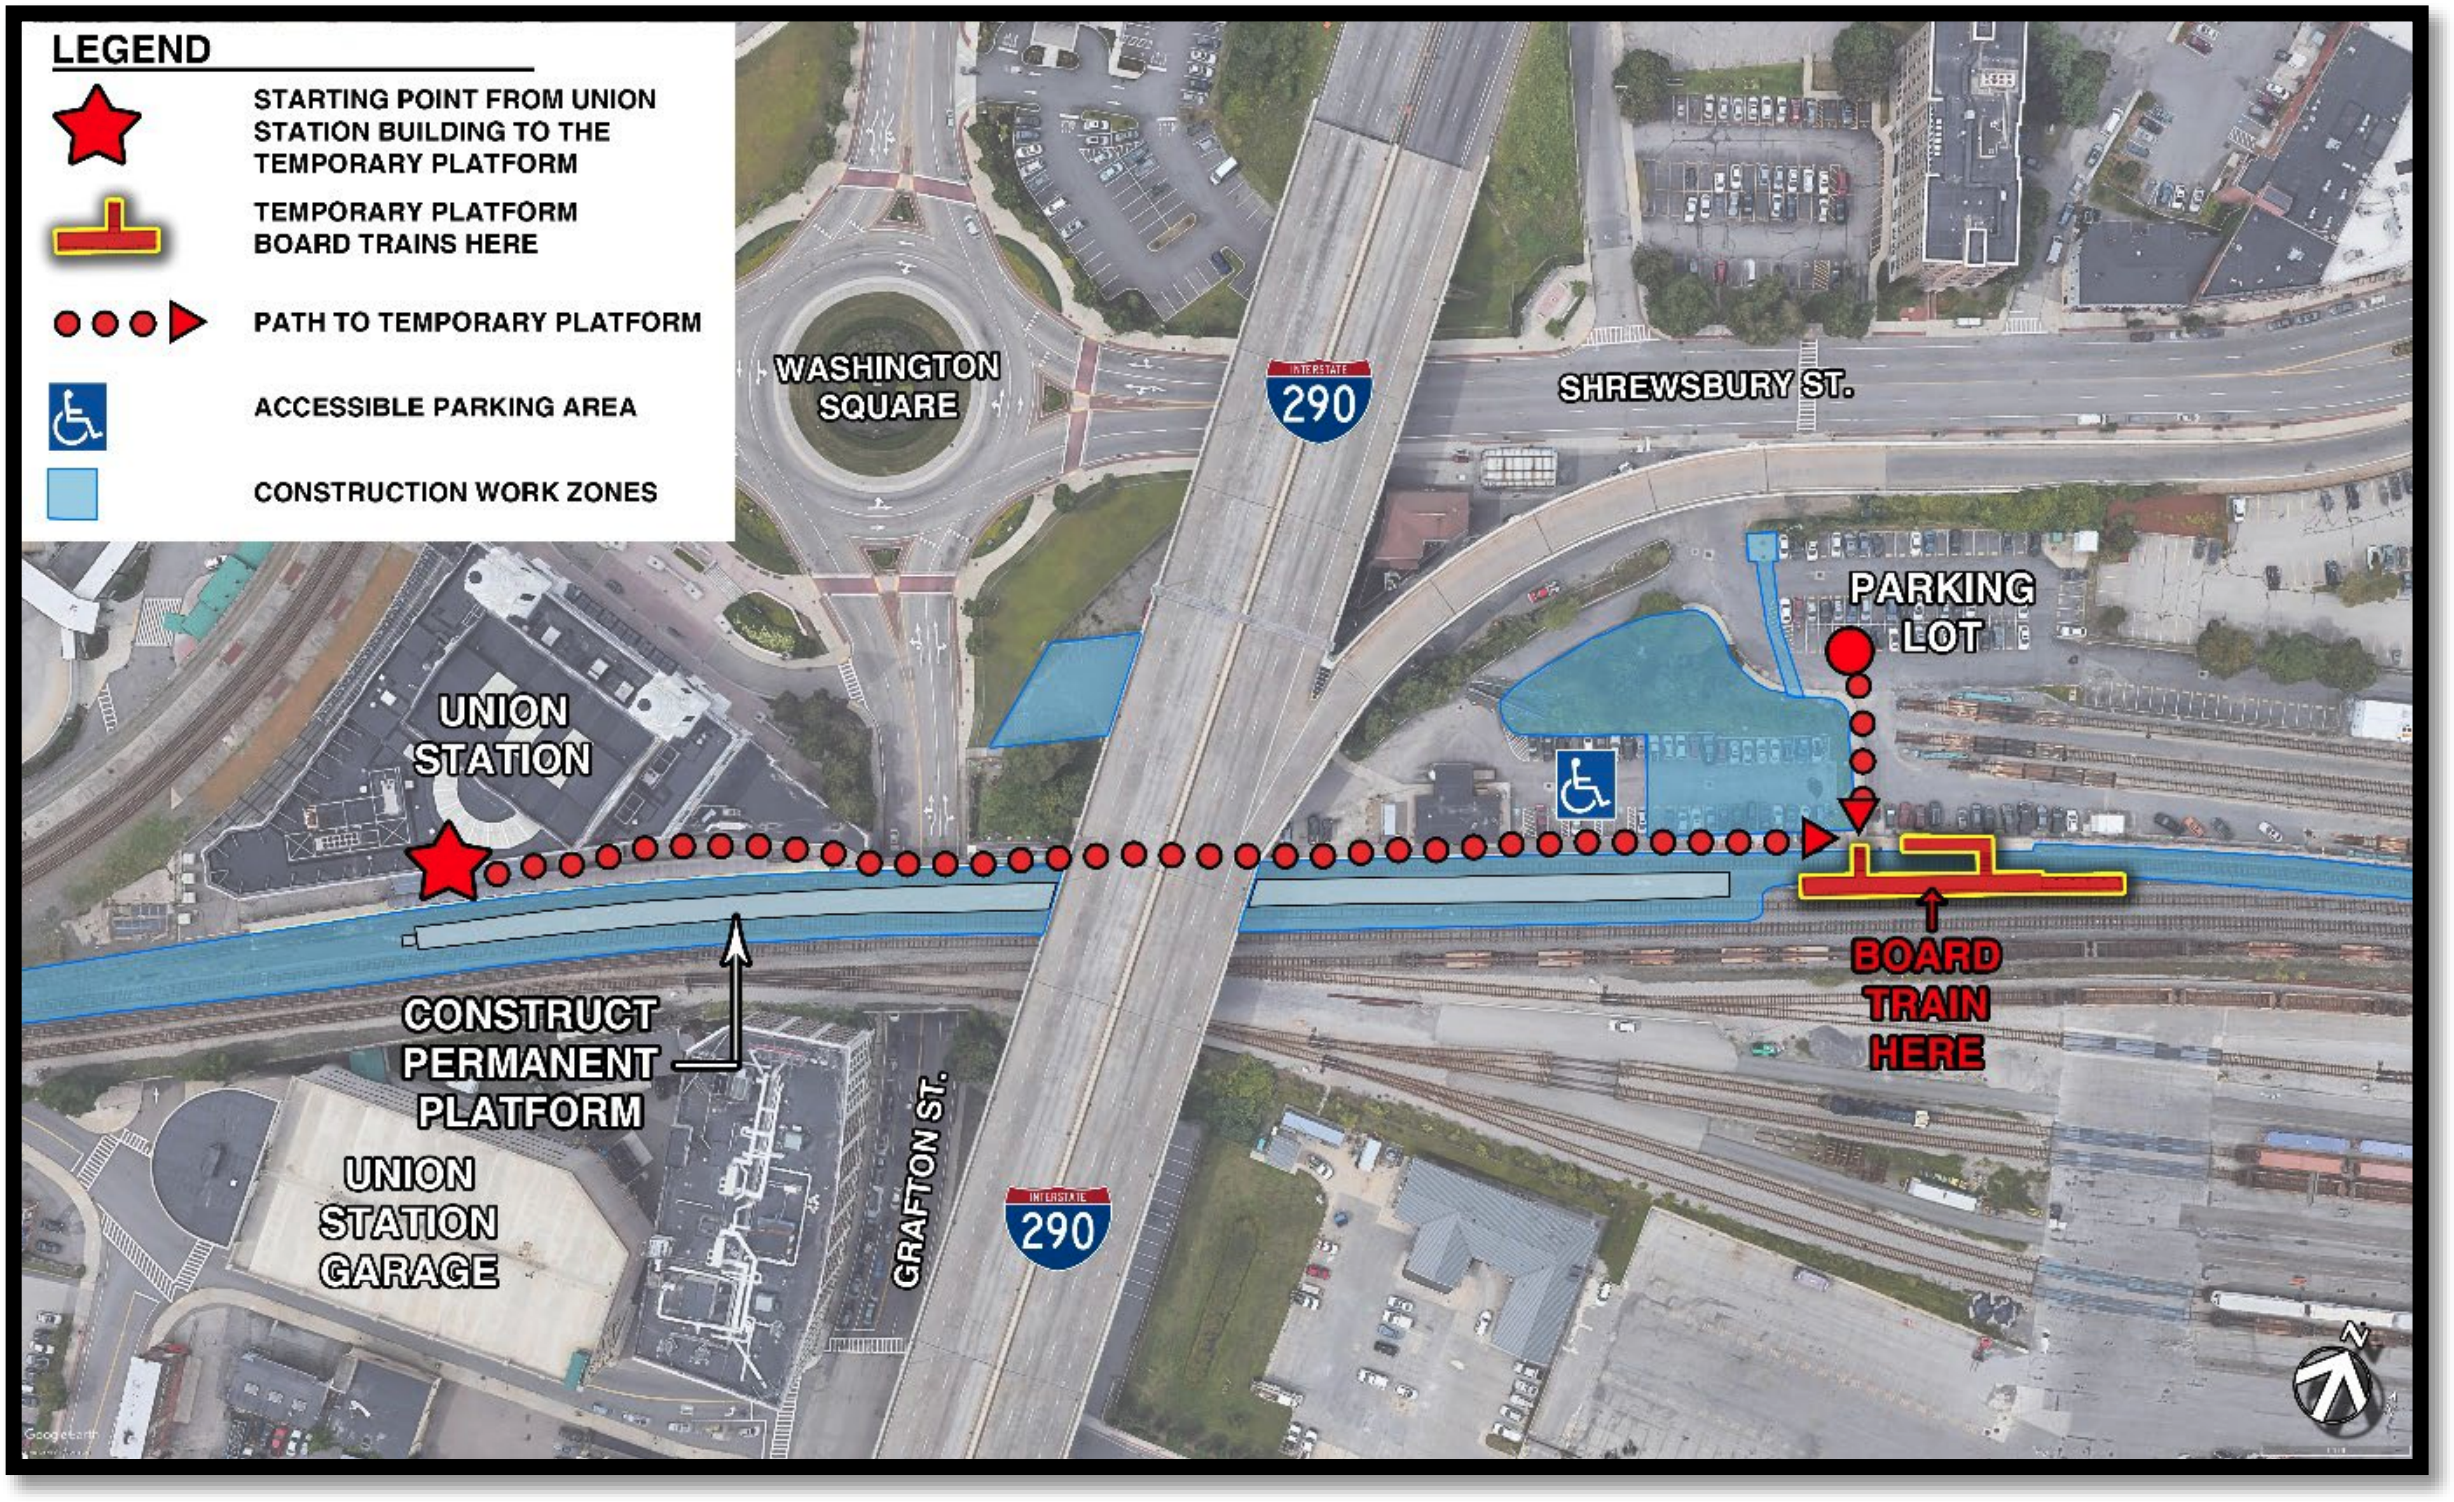 Overhead map of the Worcester Union Station area with the temporary pedestrian path from the front of the station to the temporary boarding area marked in red